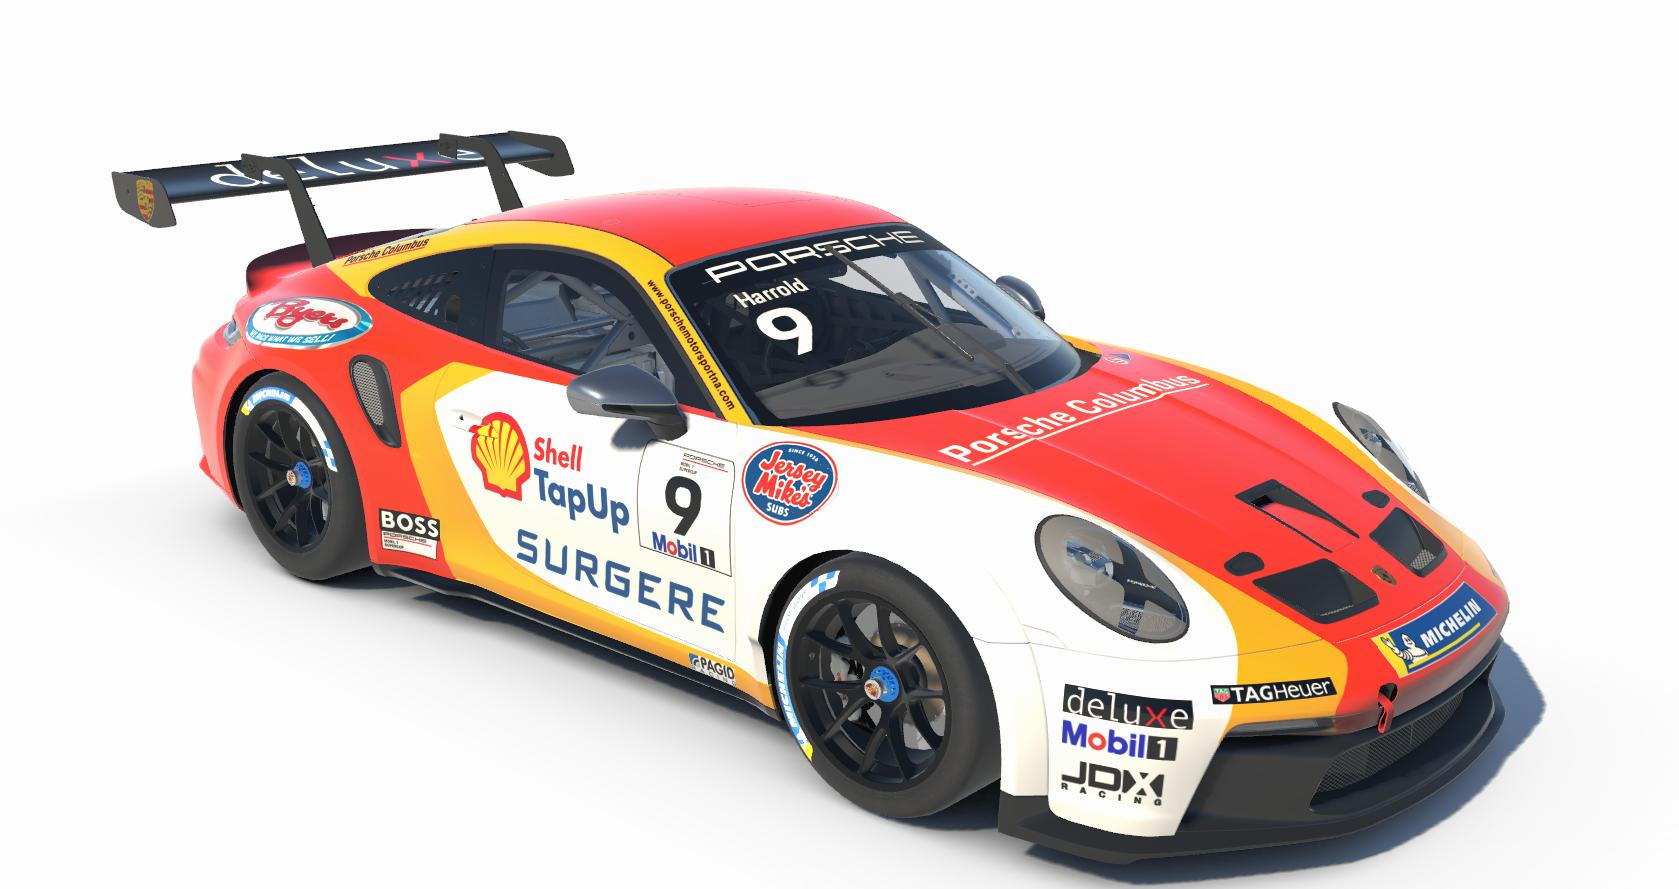 Preview of 2022 Parker Thompson JDX Racing BYERS Porsche  by Corey H.